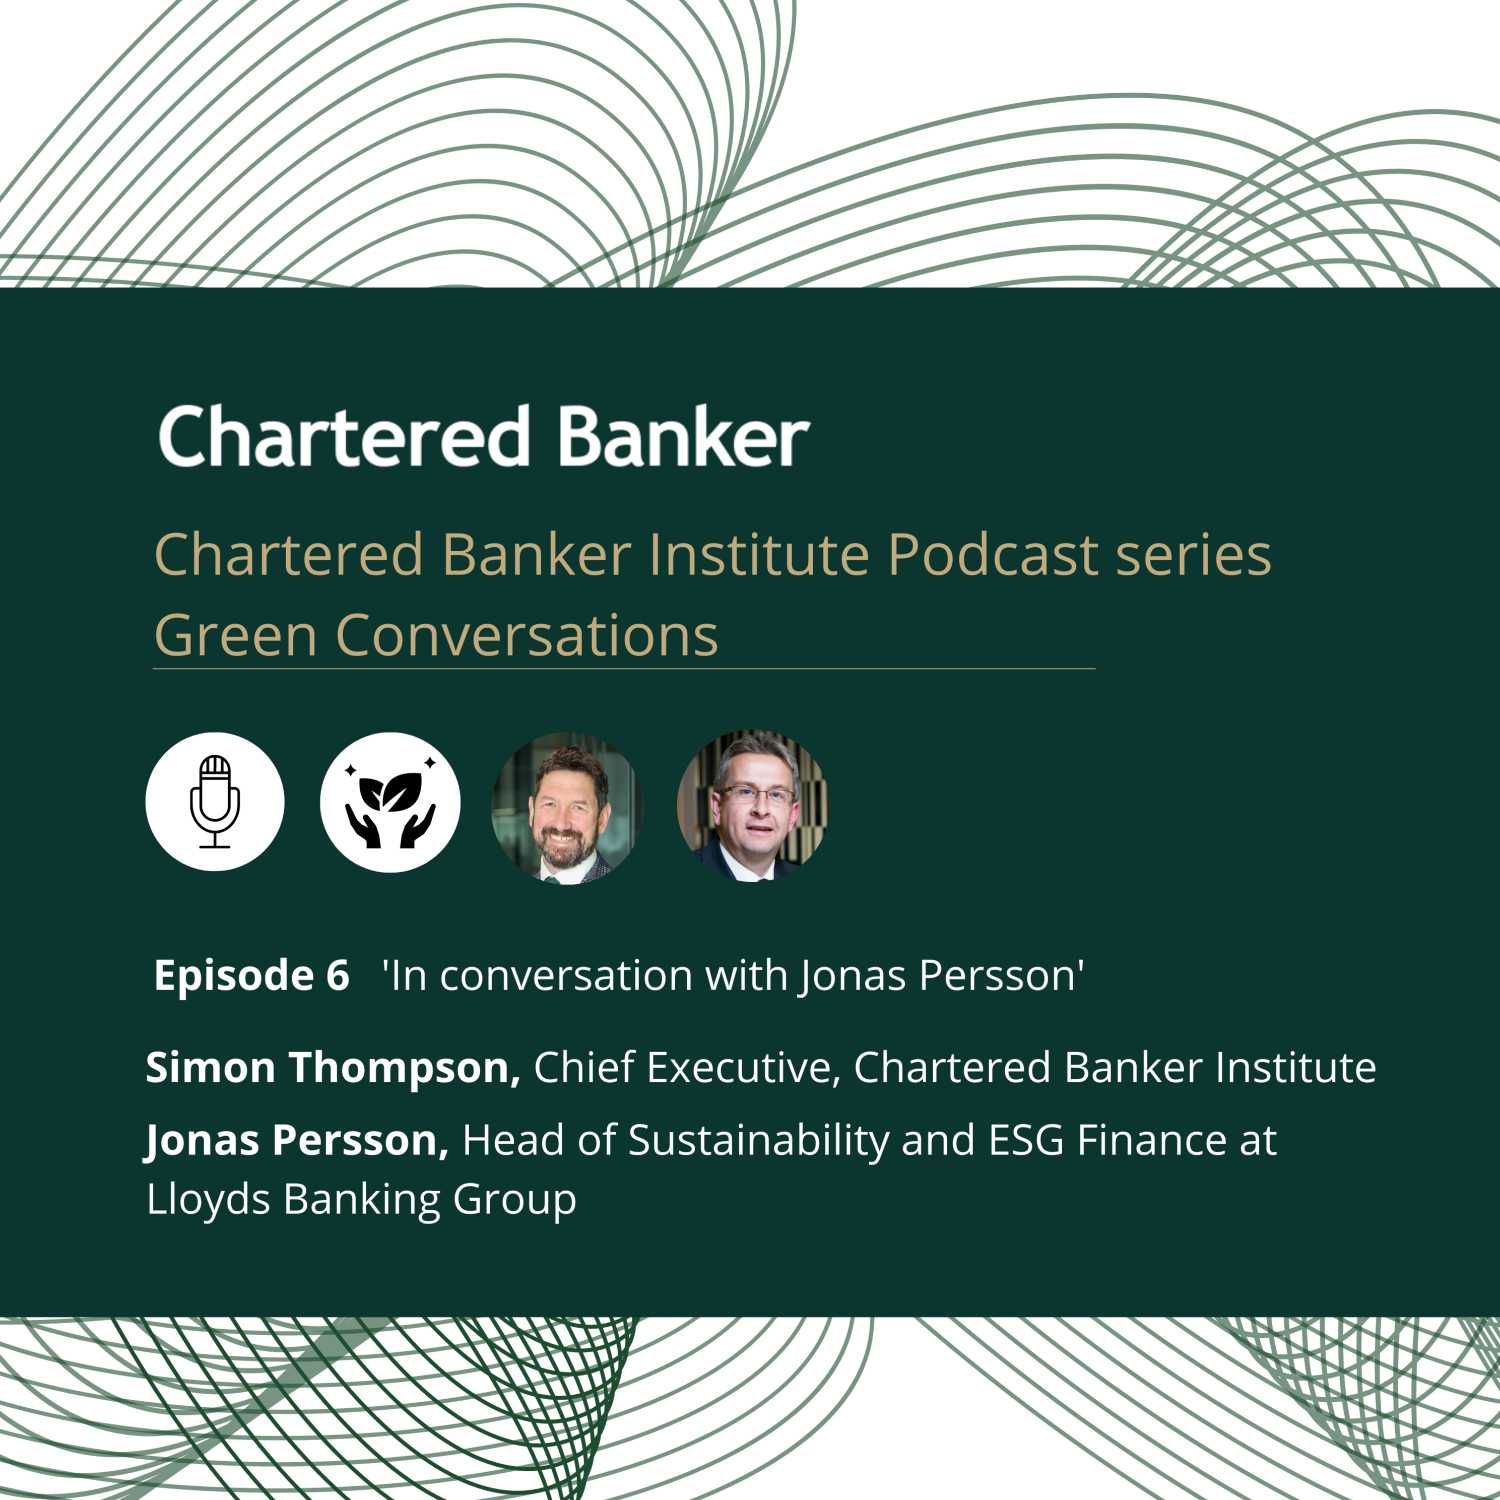 S3 E6 In conversation with Jonas Persson, Head of Sustainability and ESG Finance at Lloyds Banking Group - Green Conversations